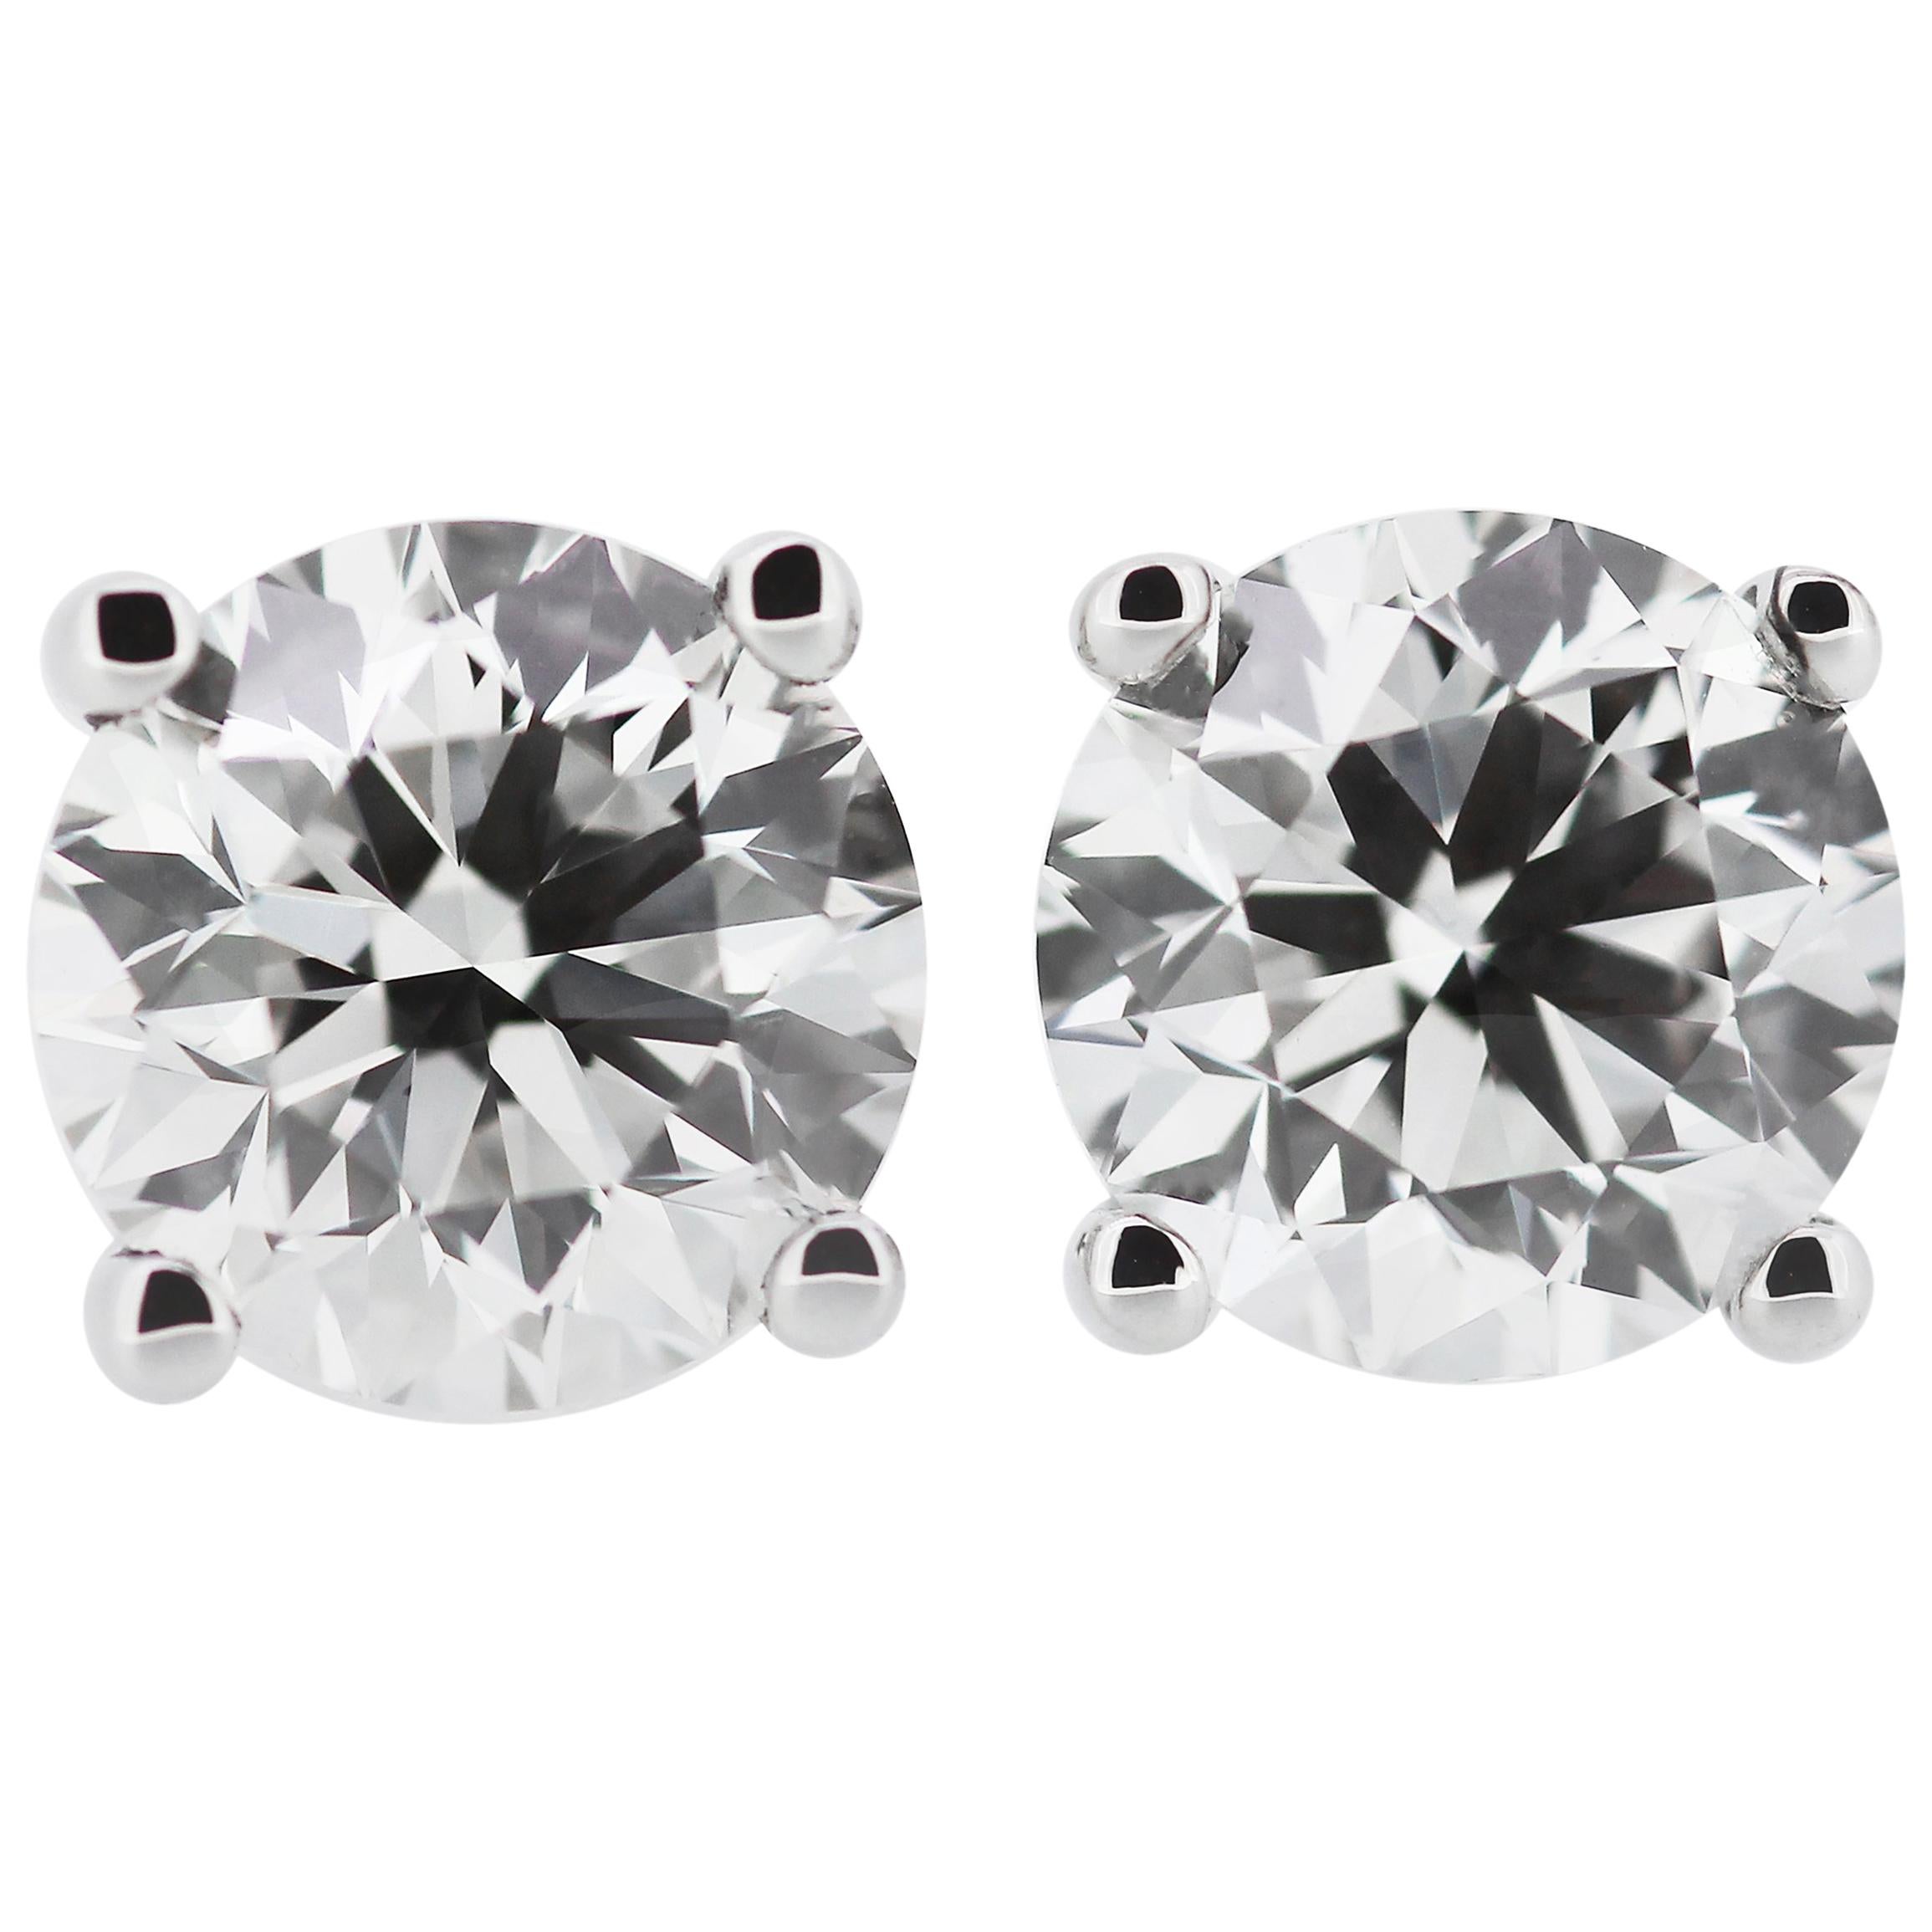 GIA Certified Round Diamond 4.04cts F VS2 Single Stone/Solitaire Stud Earrings 